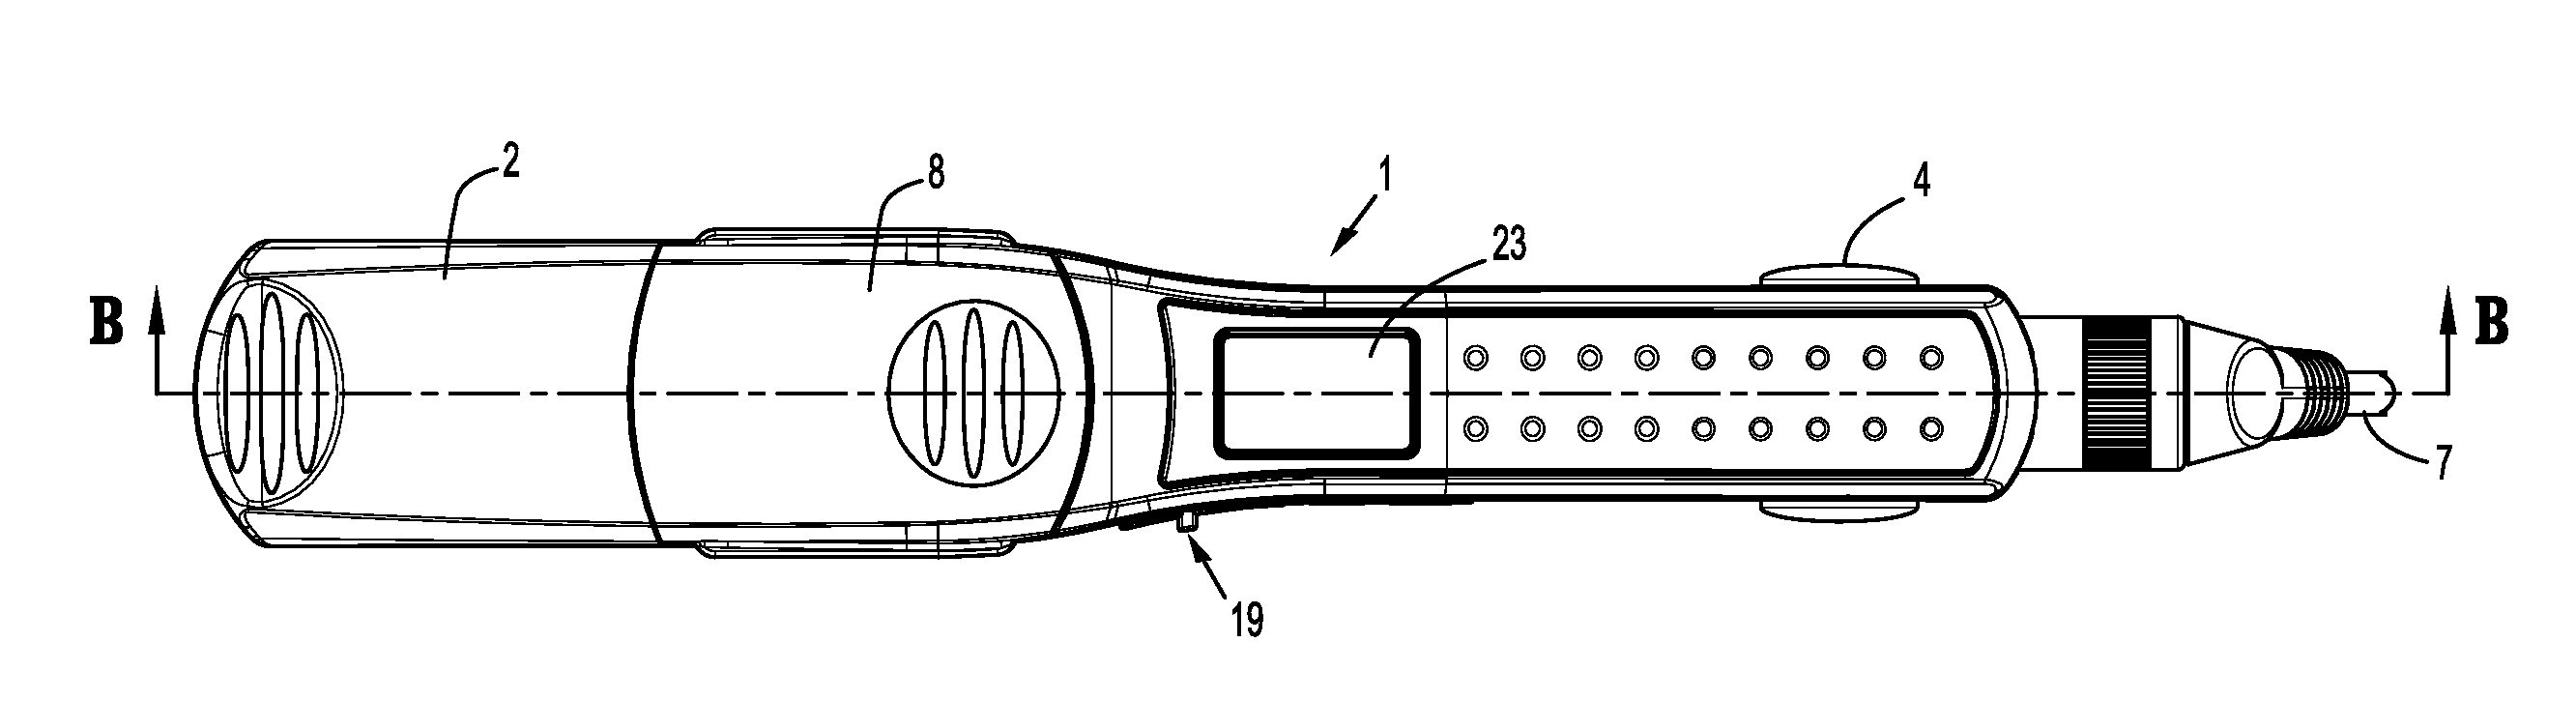 Hair straightening appliance with variable steam output control